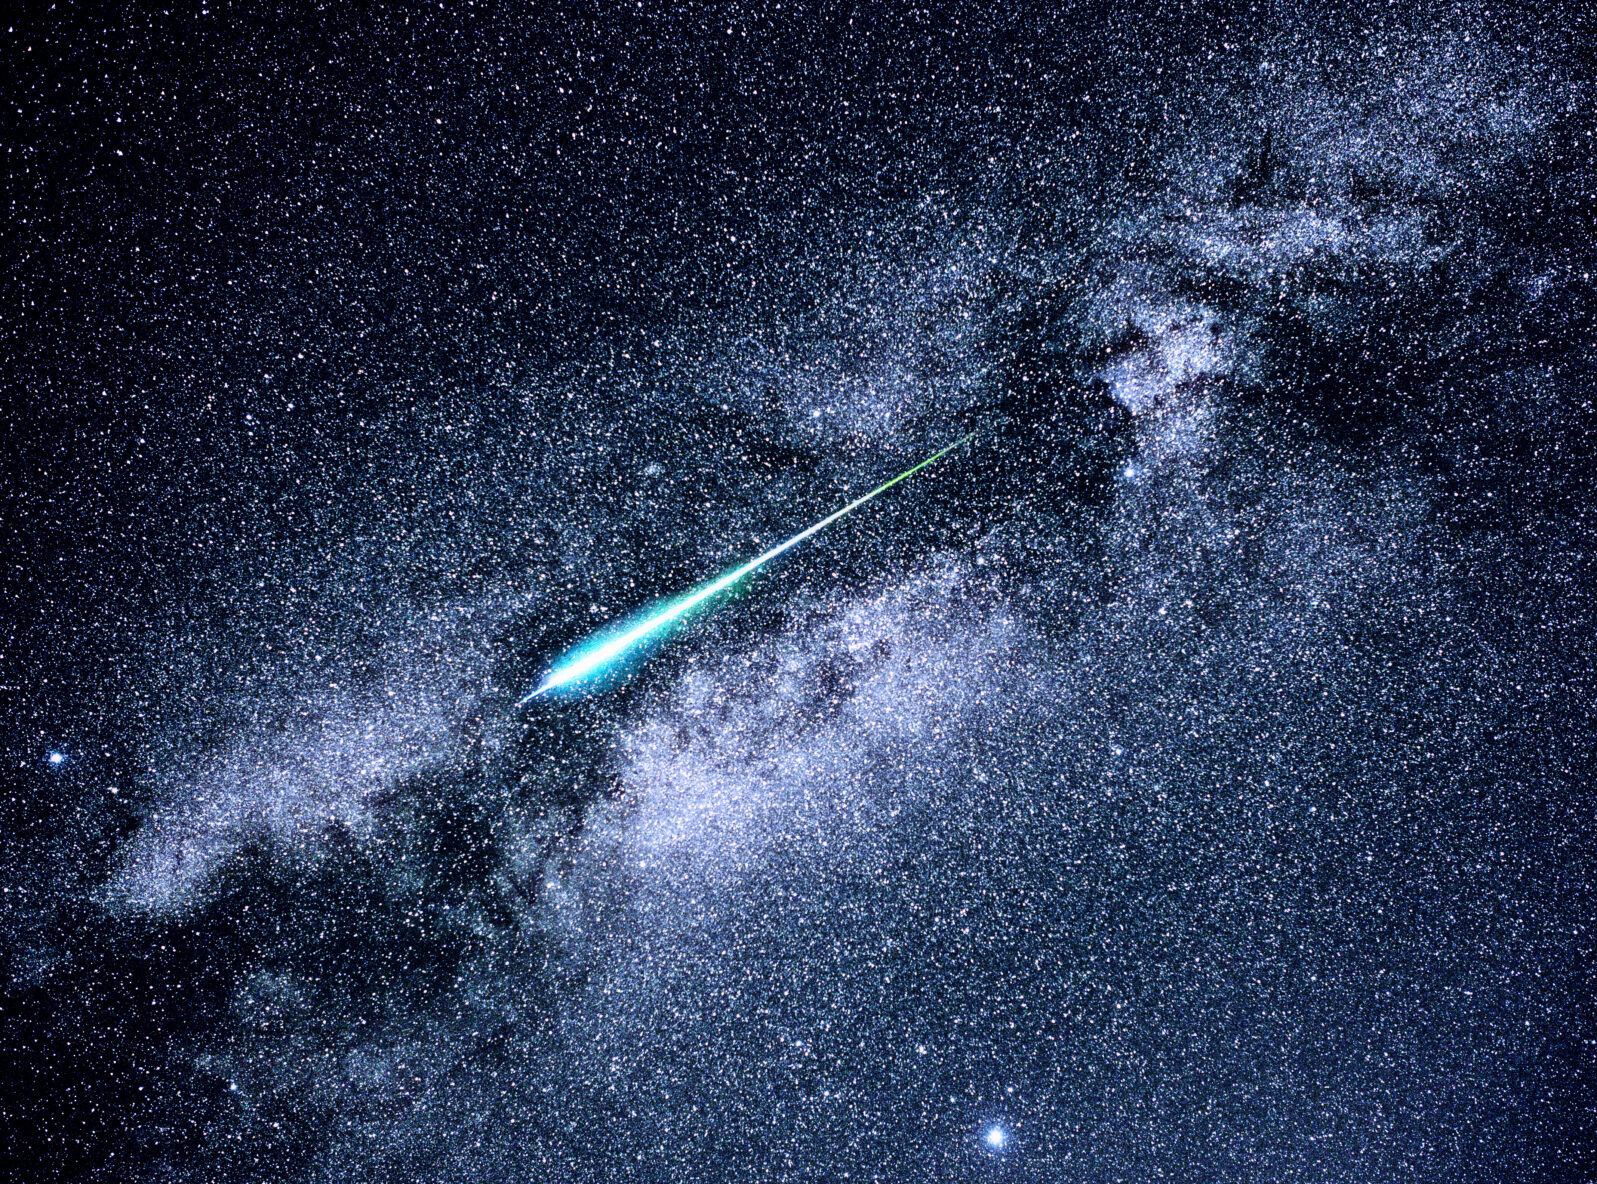 A meteor streaks across the Milky Way during the Perseid meteor shower of 2016.